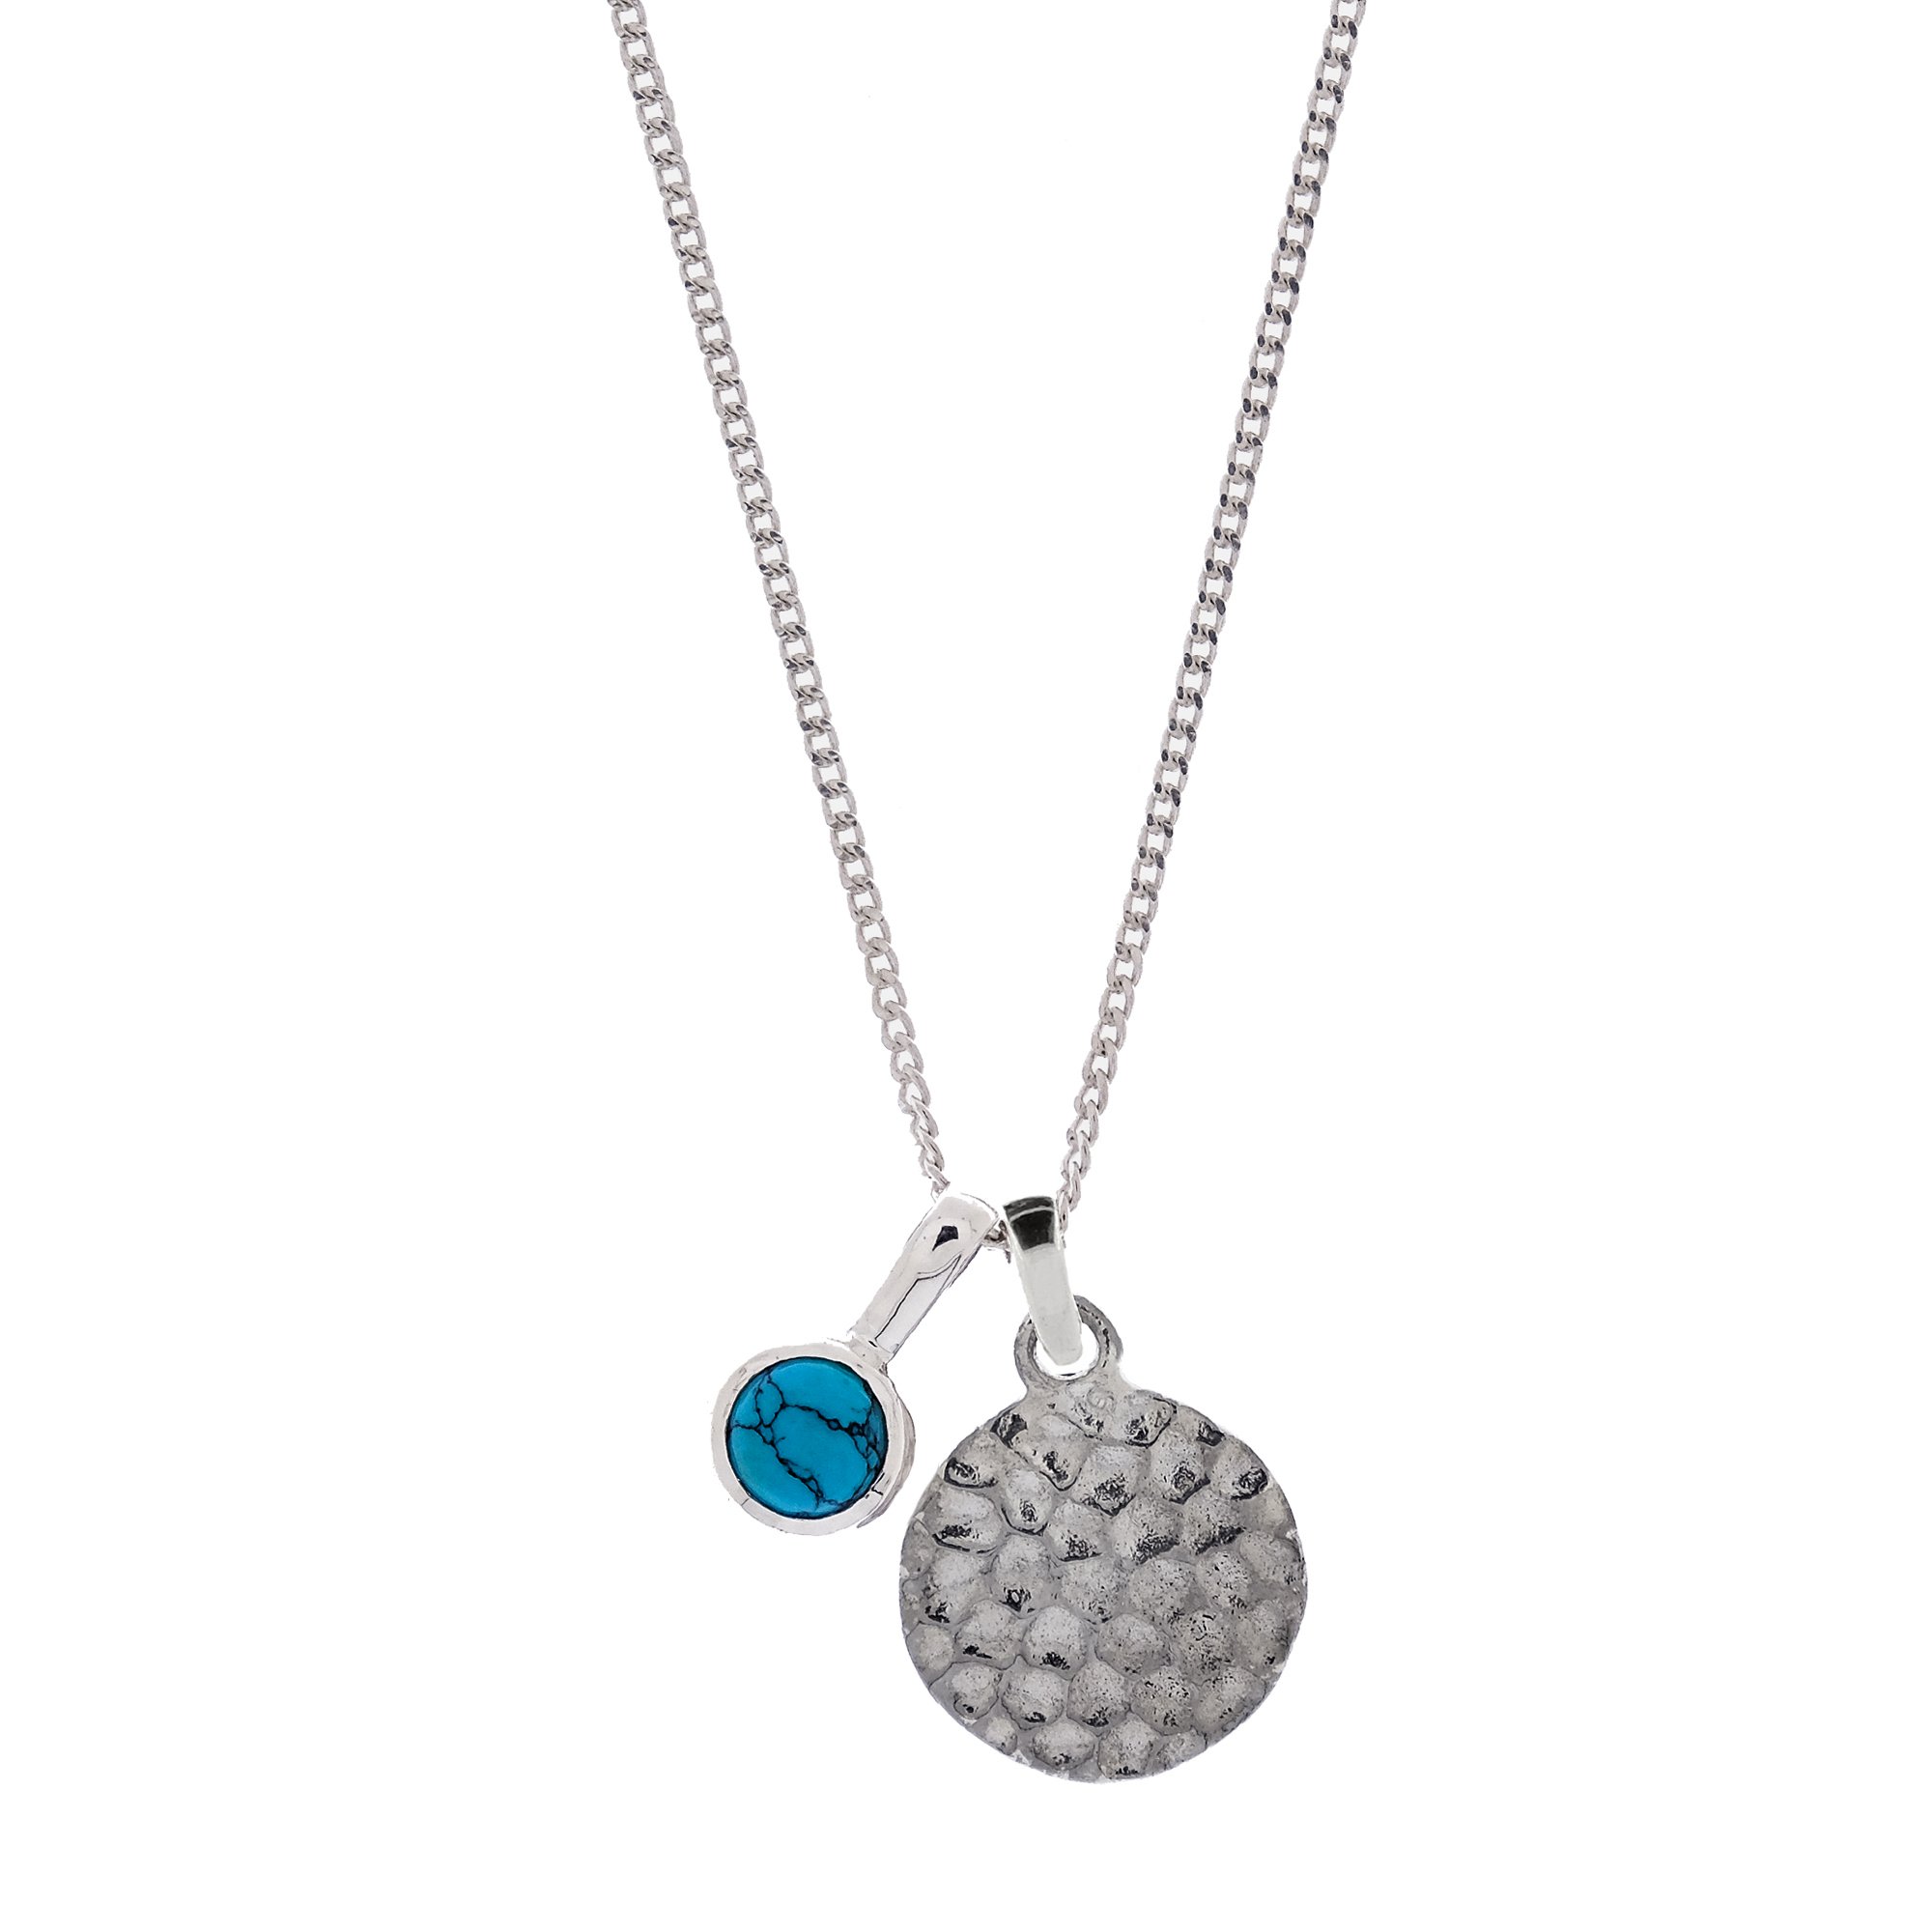 Women’s Lakshmi Hammered Disc Silver Necklace With Turquoise Charm Charlotte’s Web Jewellery